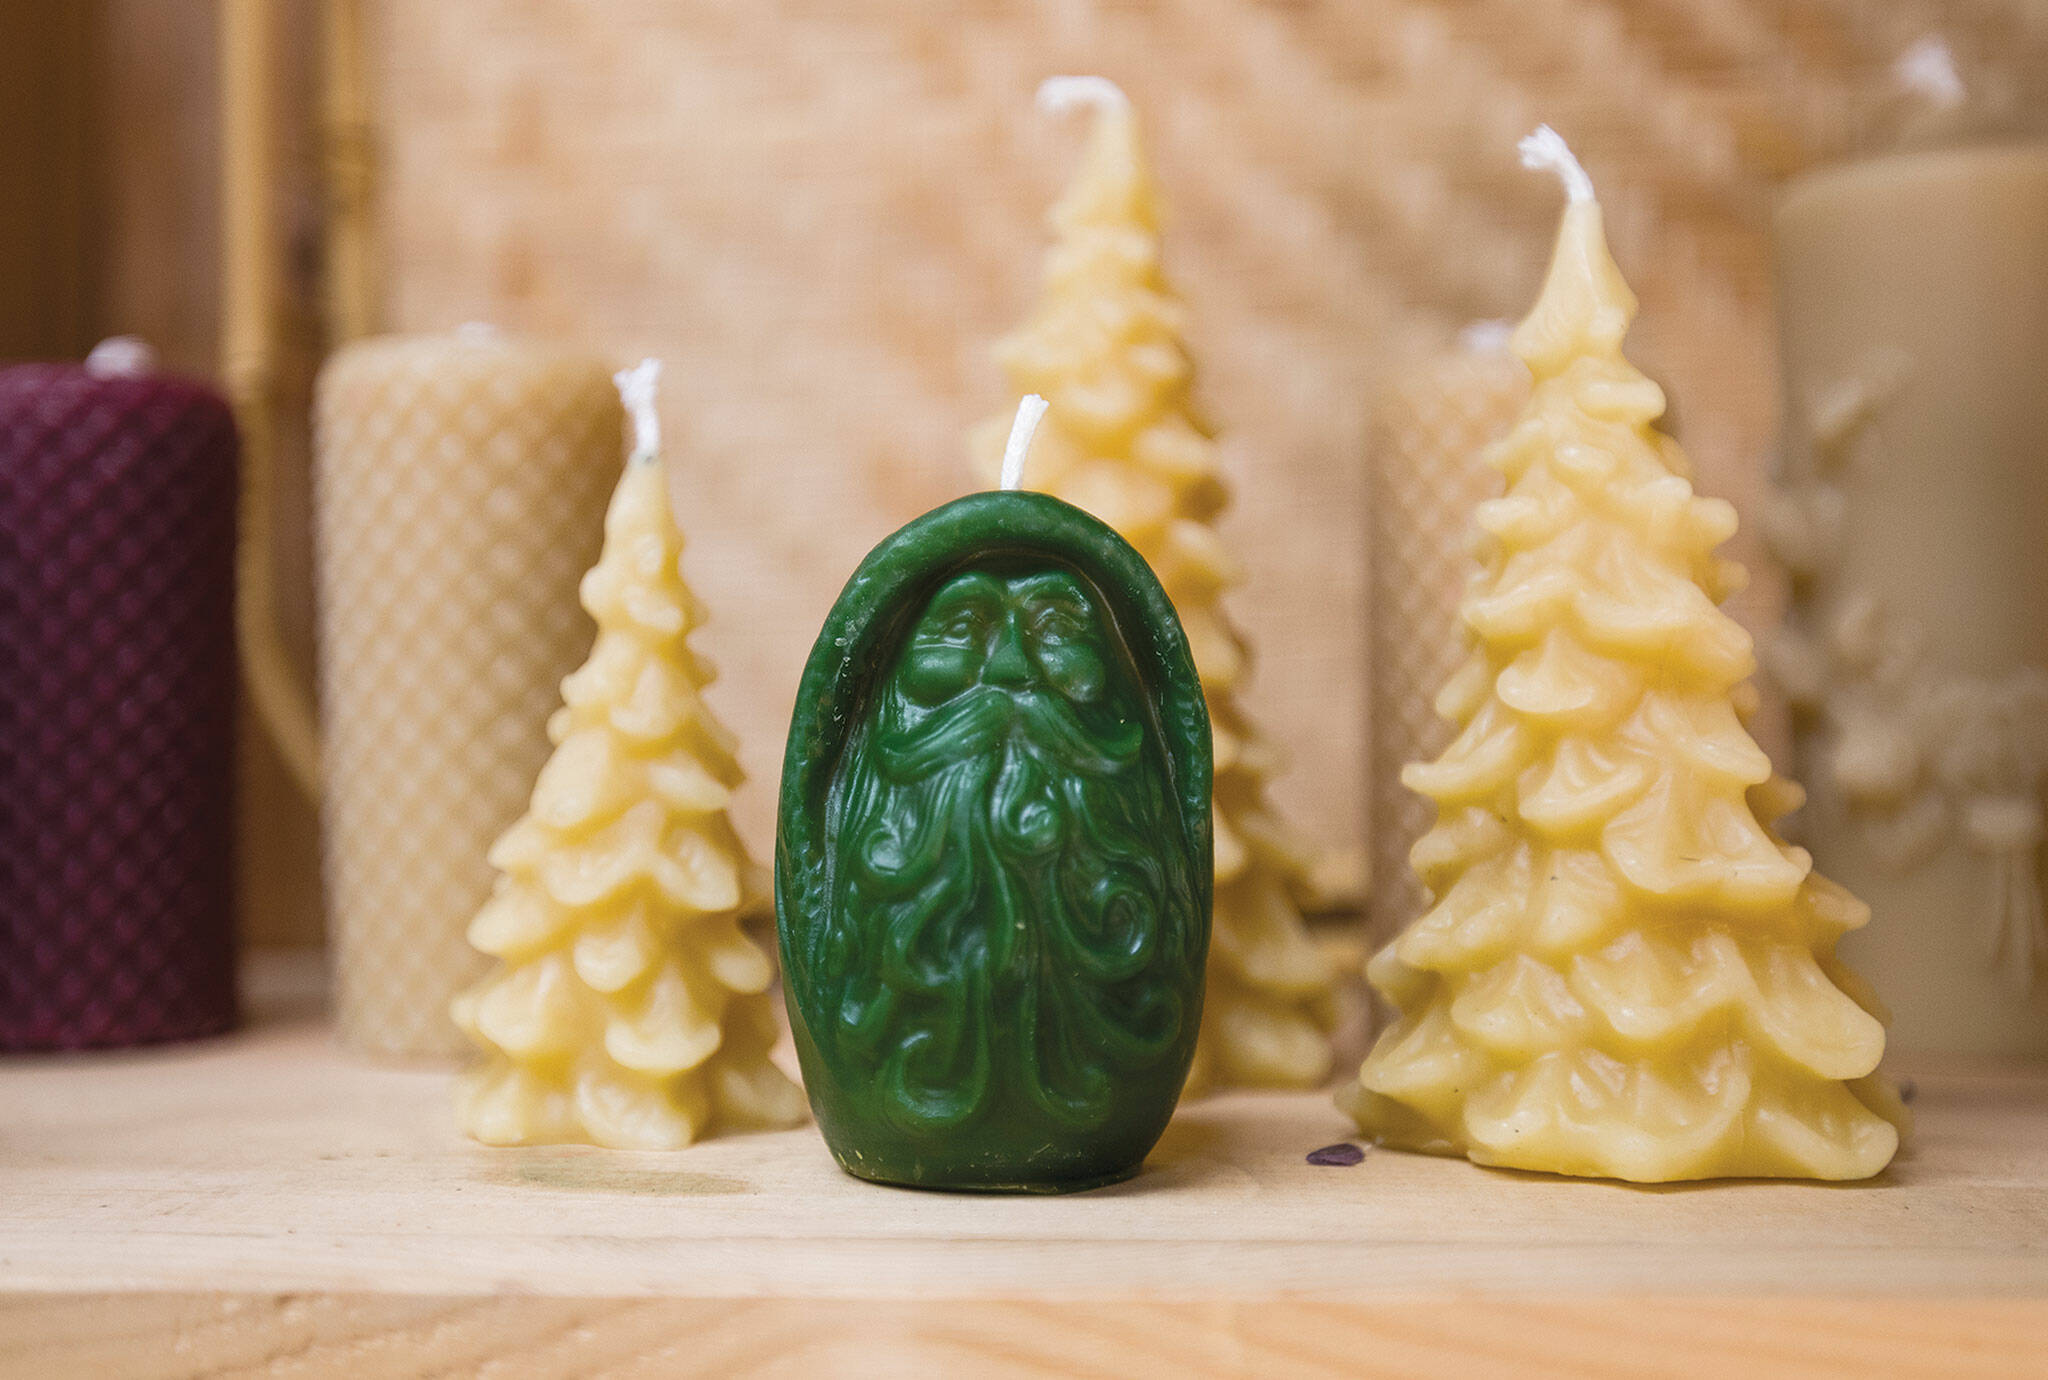 Lowry’s candles make ideal Christmas gifts. (Olivia Vanni / The Herald)